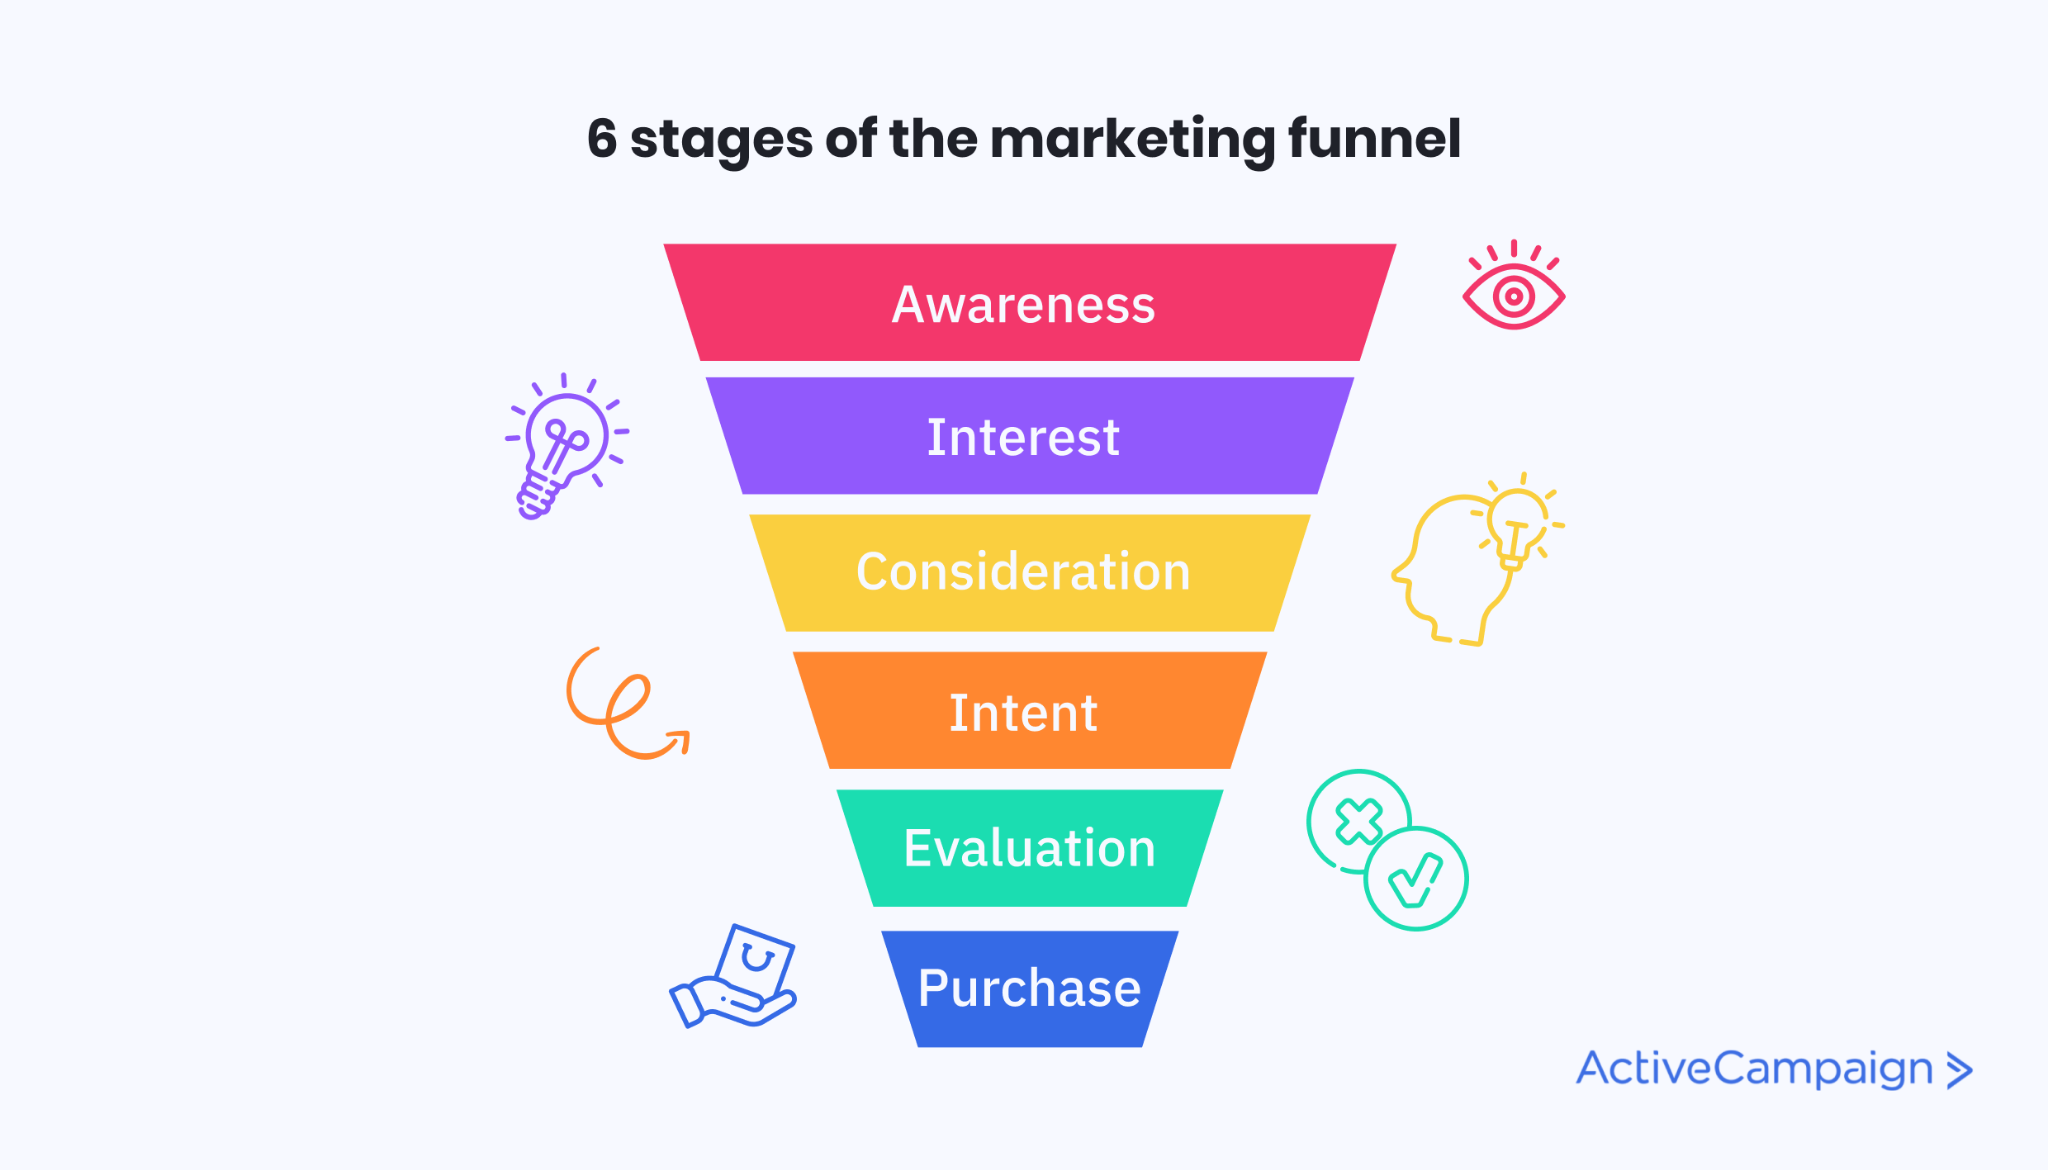 Image of the 6 stages of the marketing funnel, including a description of each